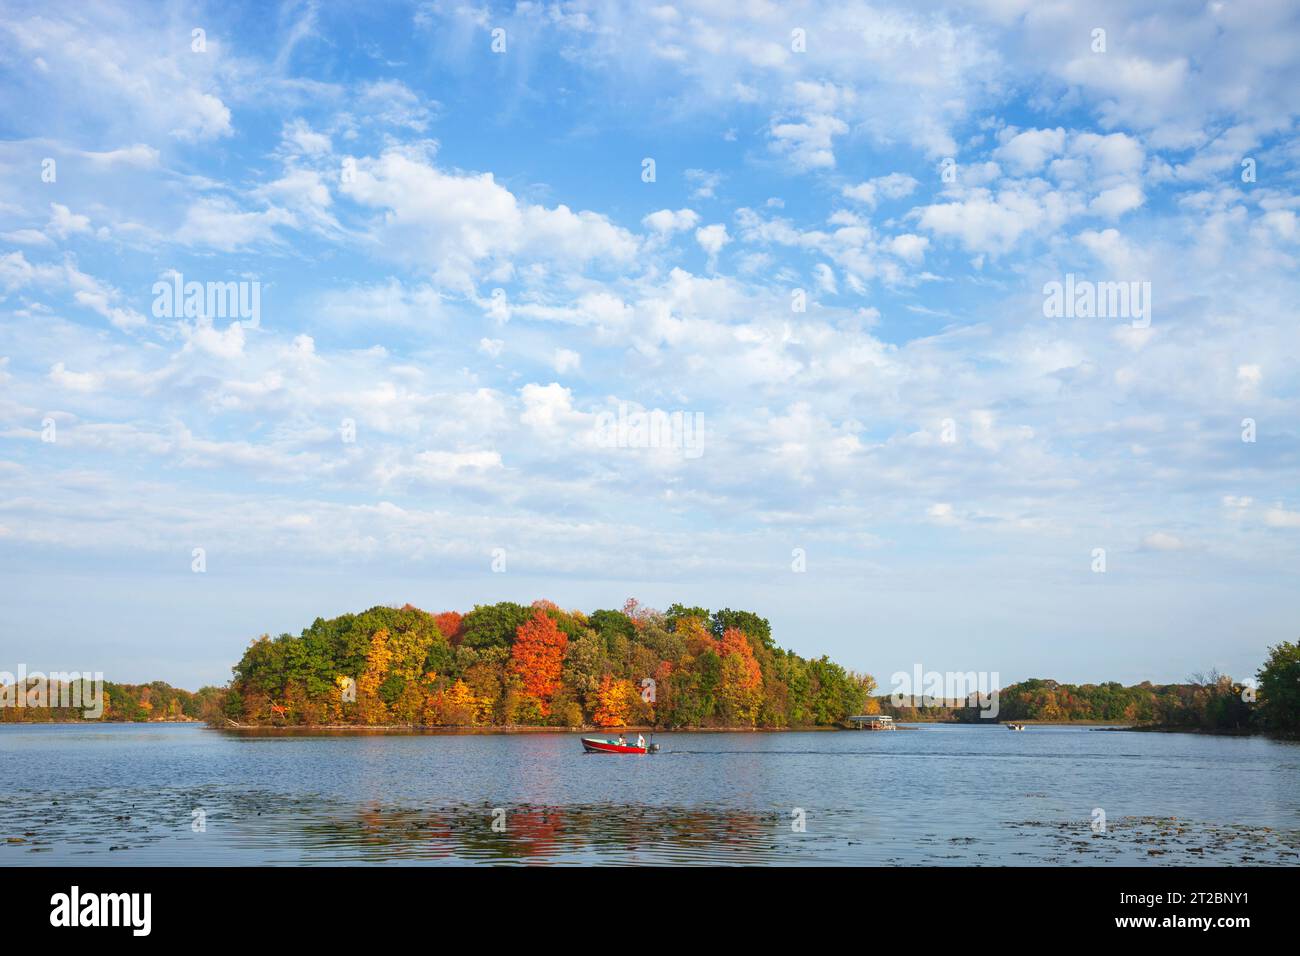 Father and son in fishing boat on a Minnesota lake with trees in fall color and beautiful clouds Stock Photo